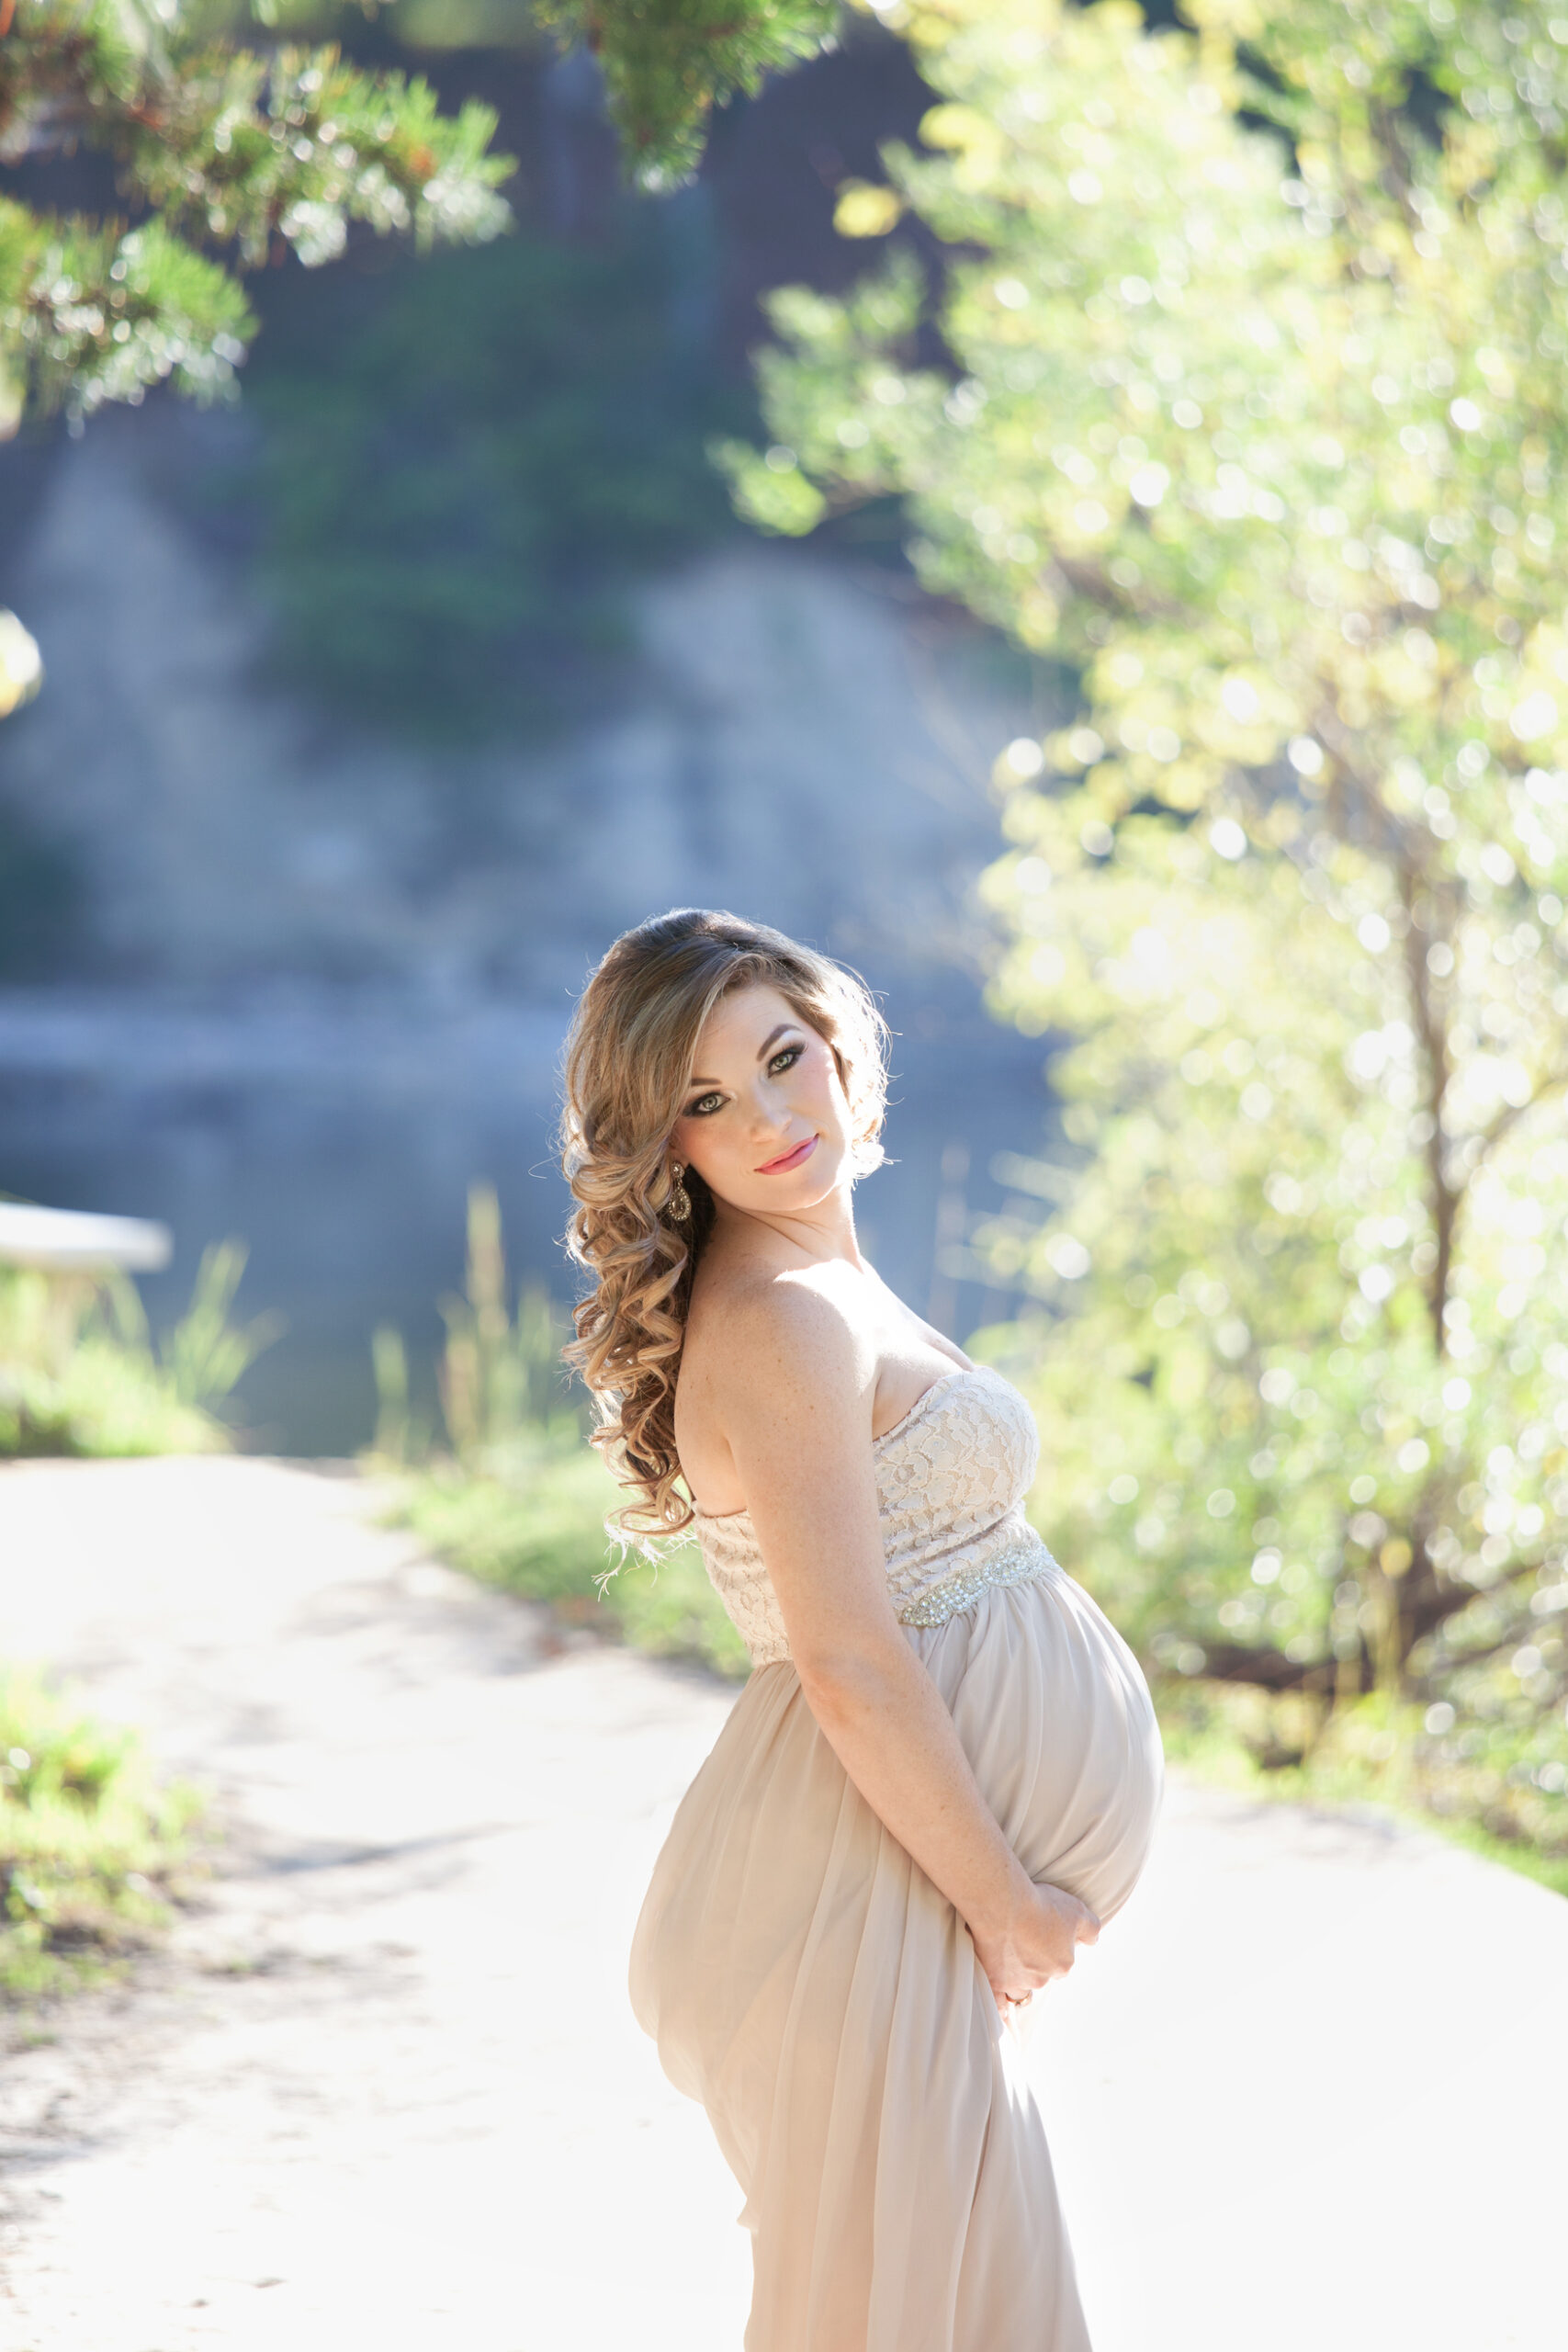 Colleen M Photography - Maternity Portraits